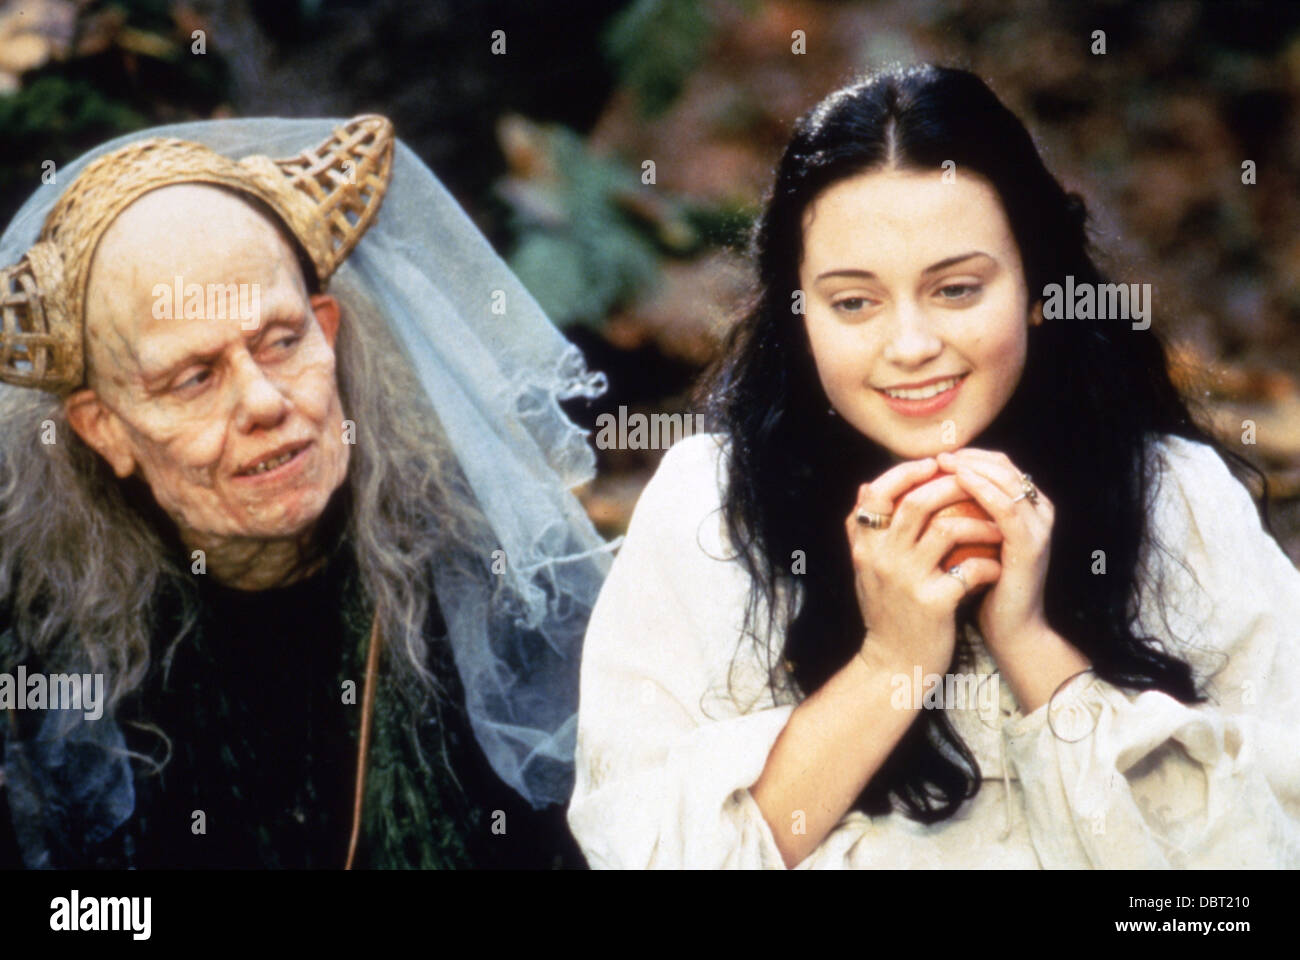 SNOW WHITE: A TALE OF TERROR (1997) GRIMM BROTHERS' SNOW WHITE (ALT) SNOW WHITE IN THE BLACK FOREST (ALT) SIGOURNEY WEAVER Stock Photo